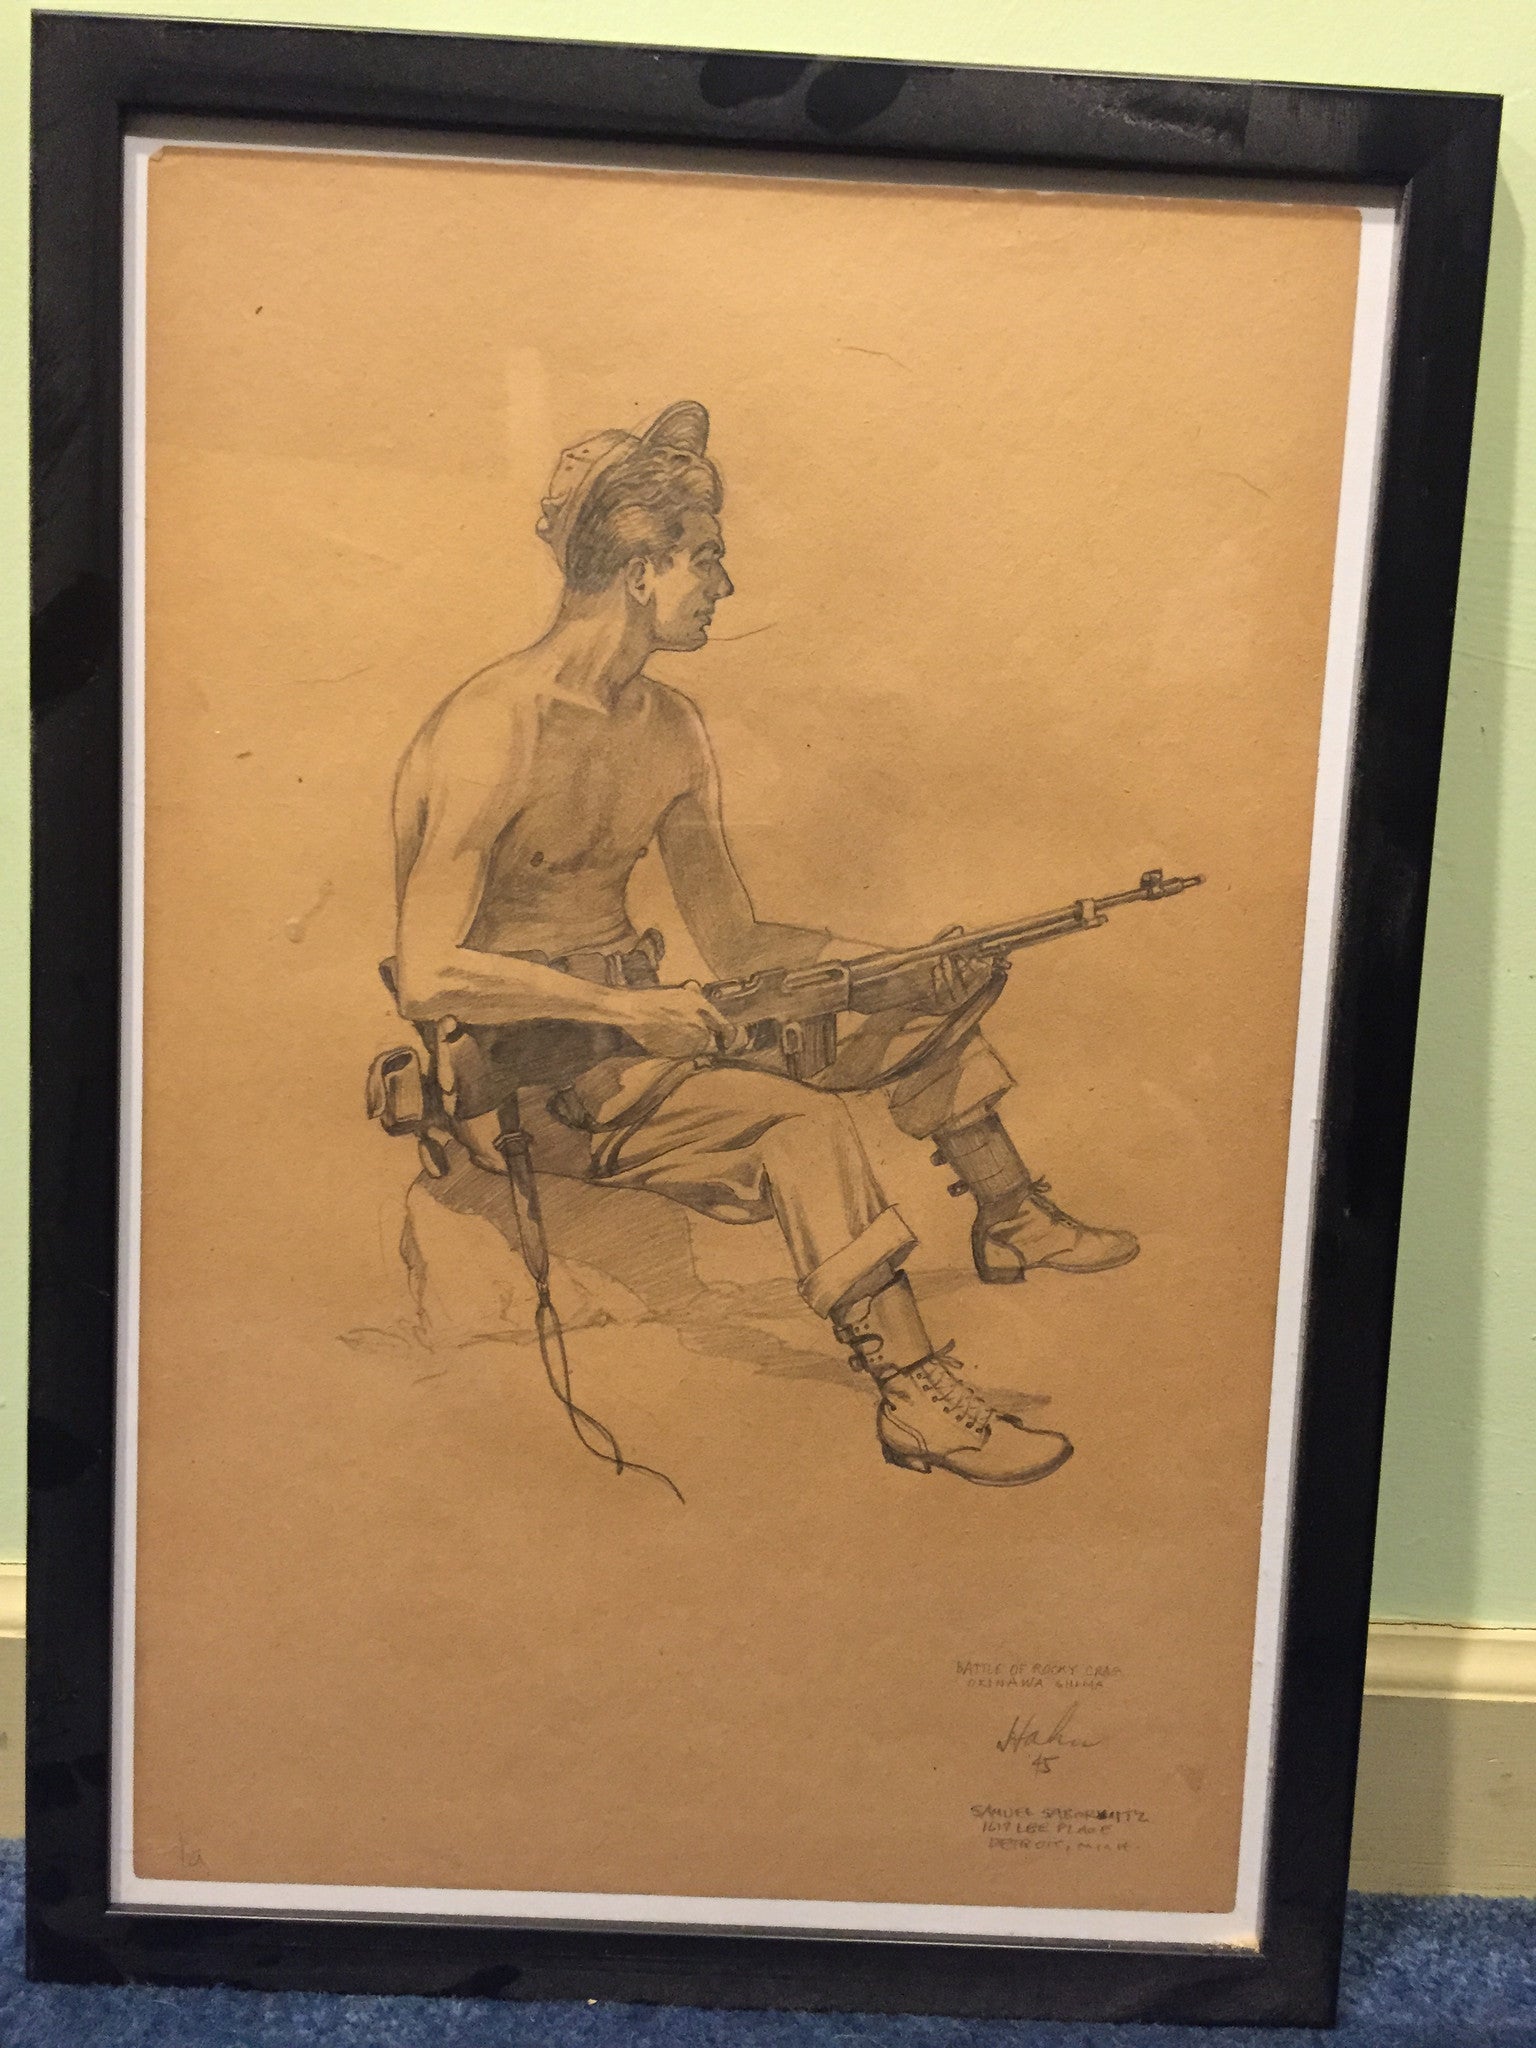 Real art! 1945 pencil sketch by Herbet C Hahn from the battle of Okinawa. Named!